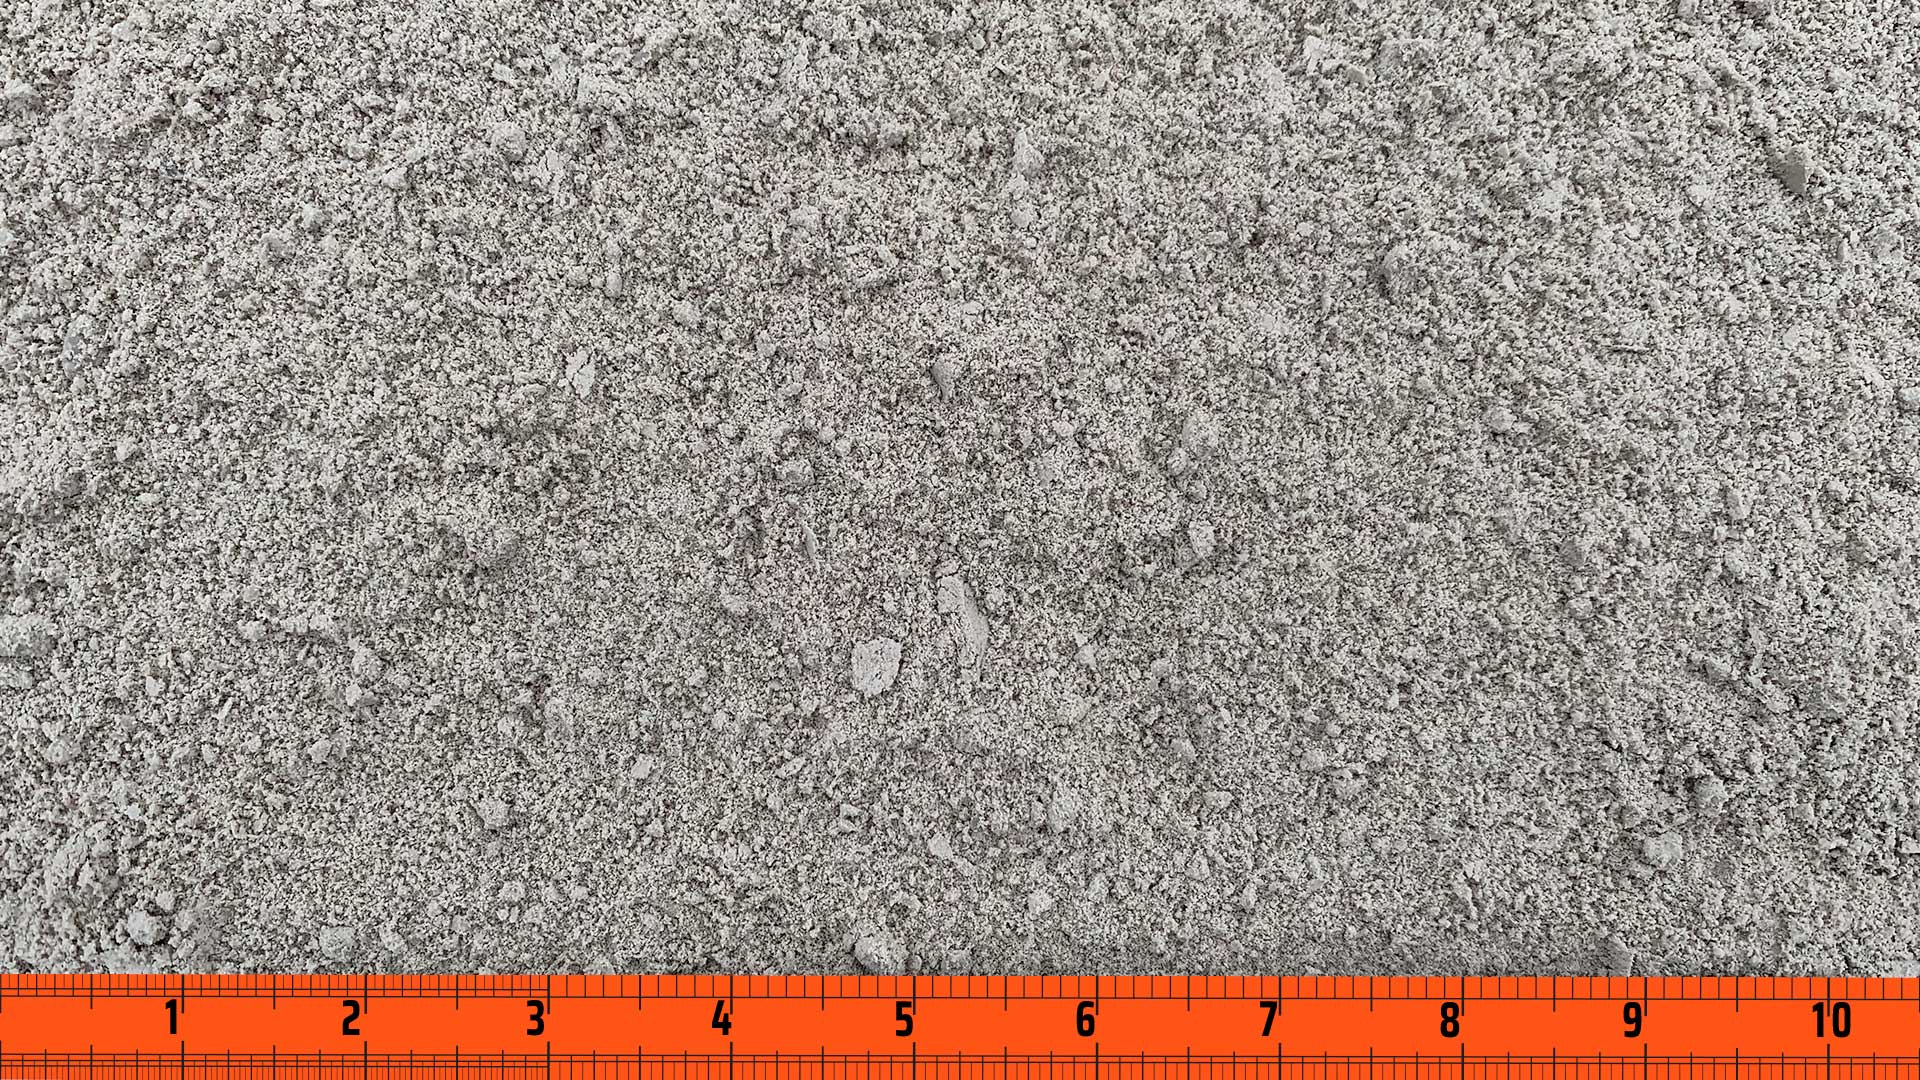 AGRICULTURAL LIME